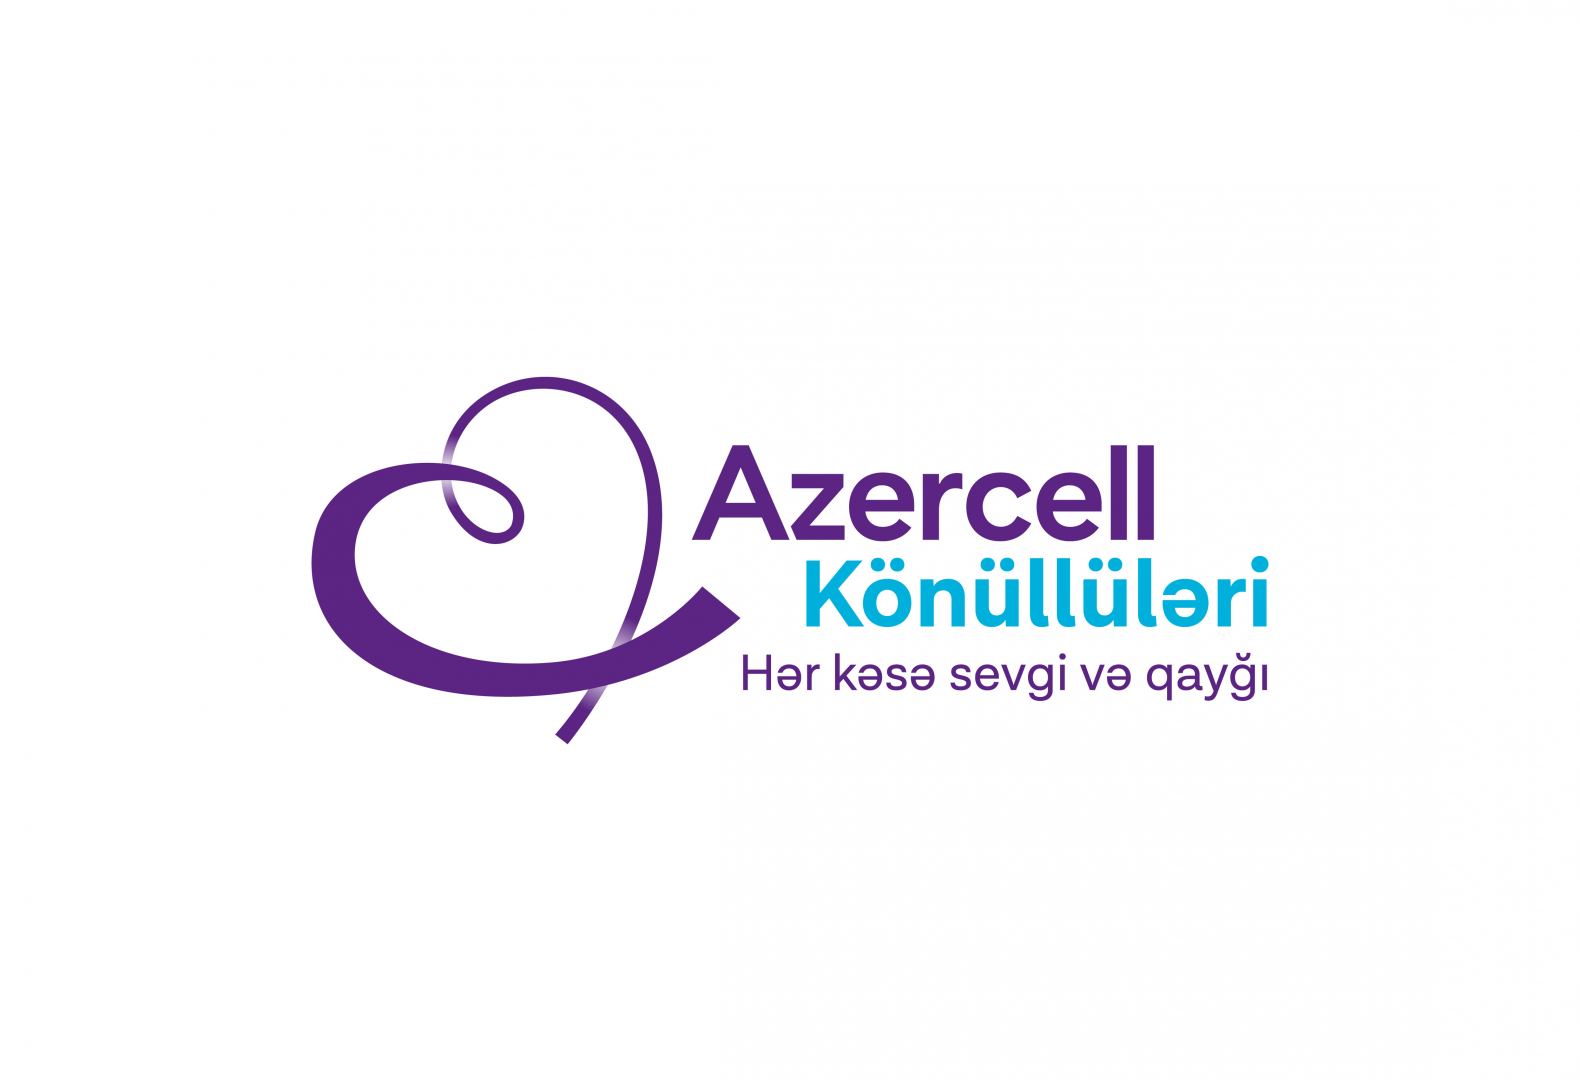 “Azercell volunteers” brought joy to thousands of families over the past year